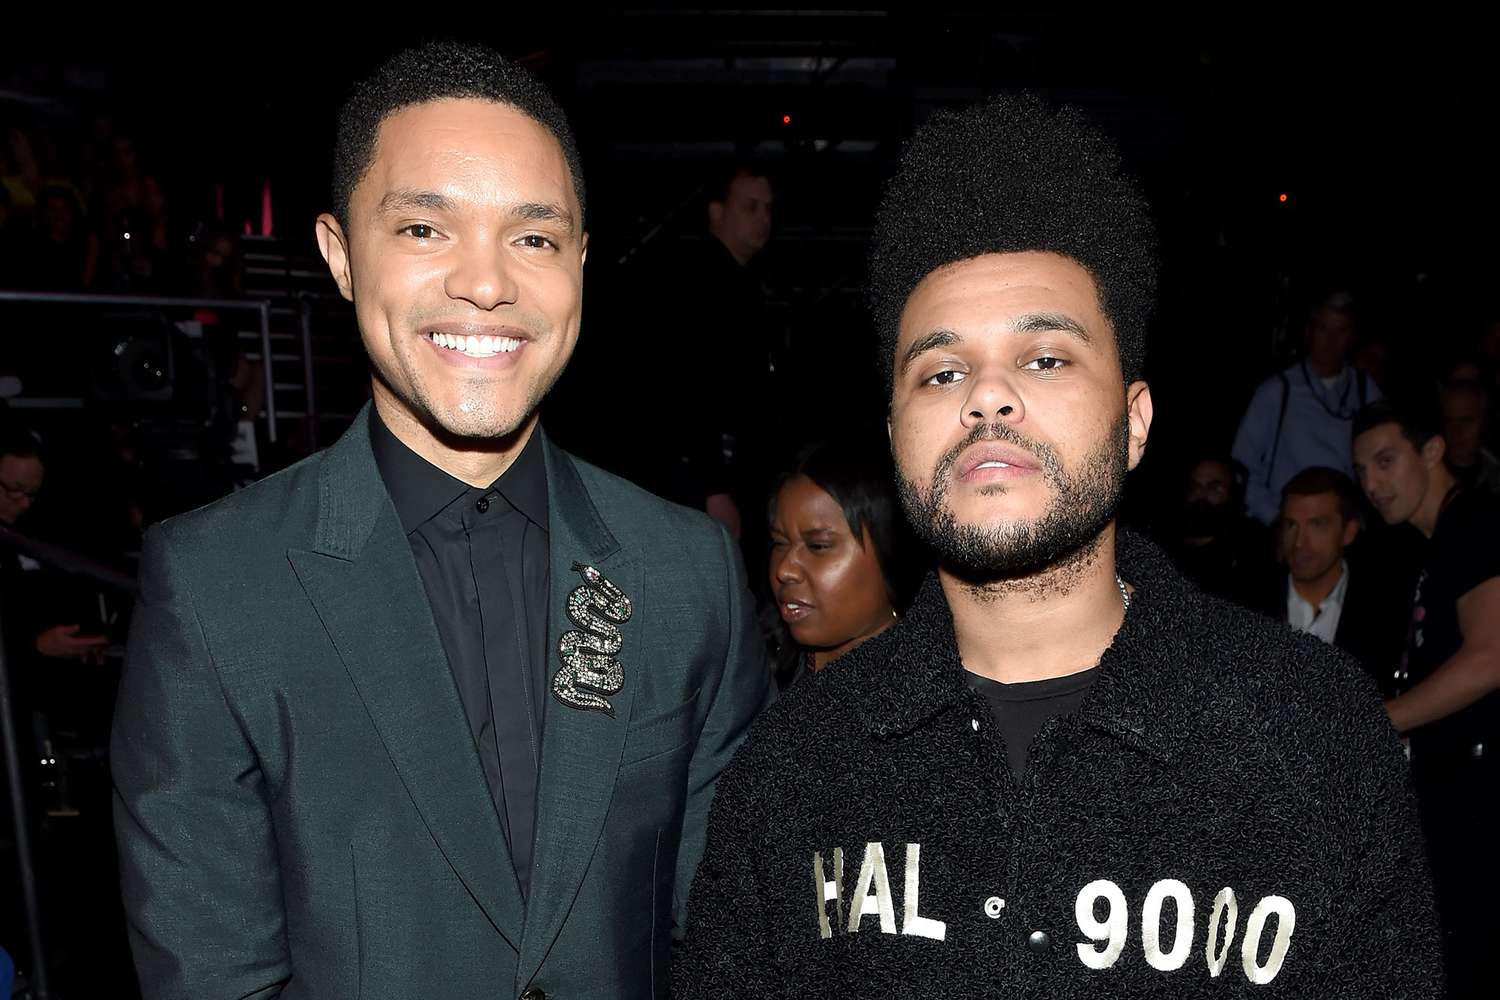 Trevor Noah and The Weeknd attend the 2018 Victoria's Secret Fashion Show in New York at Pier 94 on November 8, 2018 in New York City.